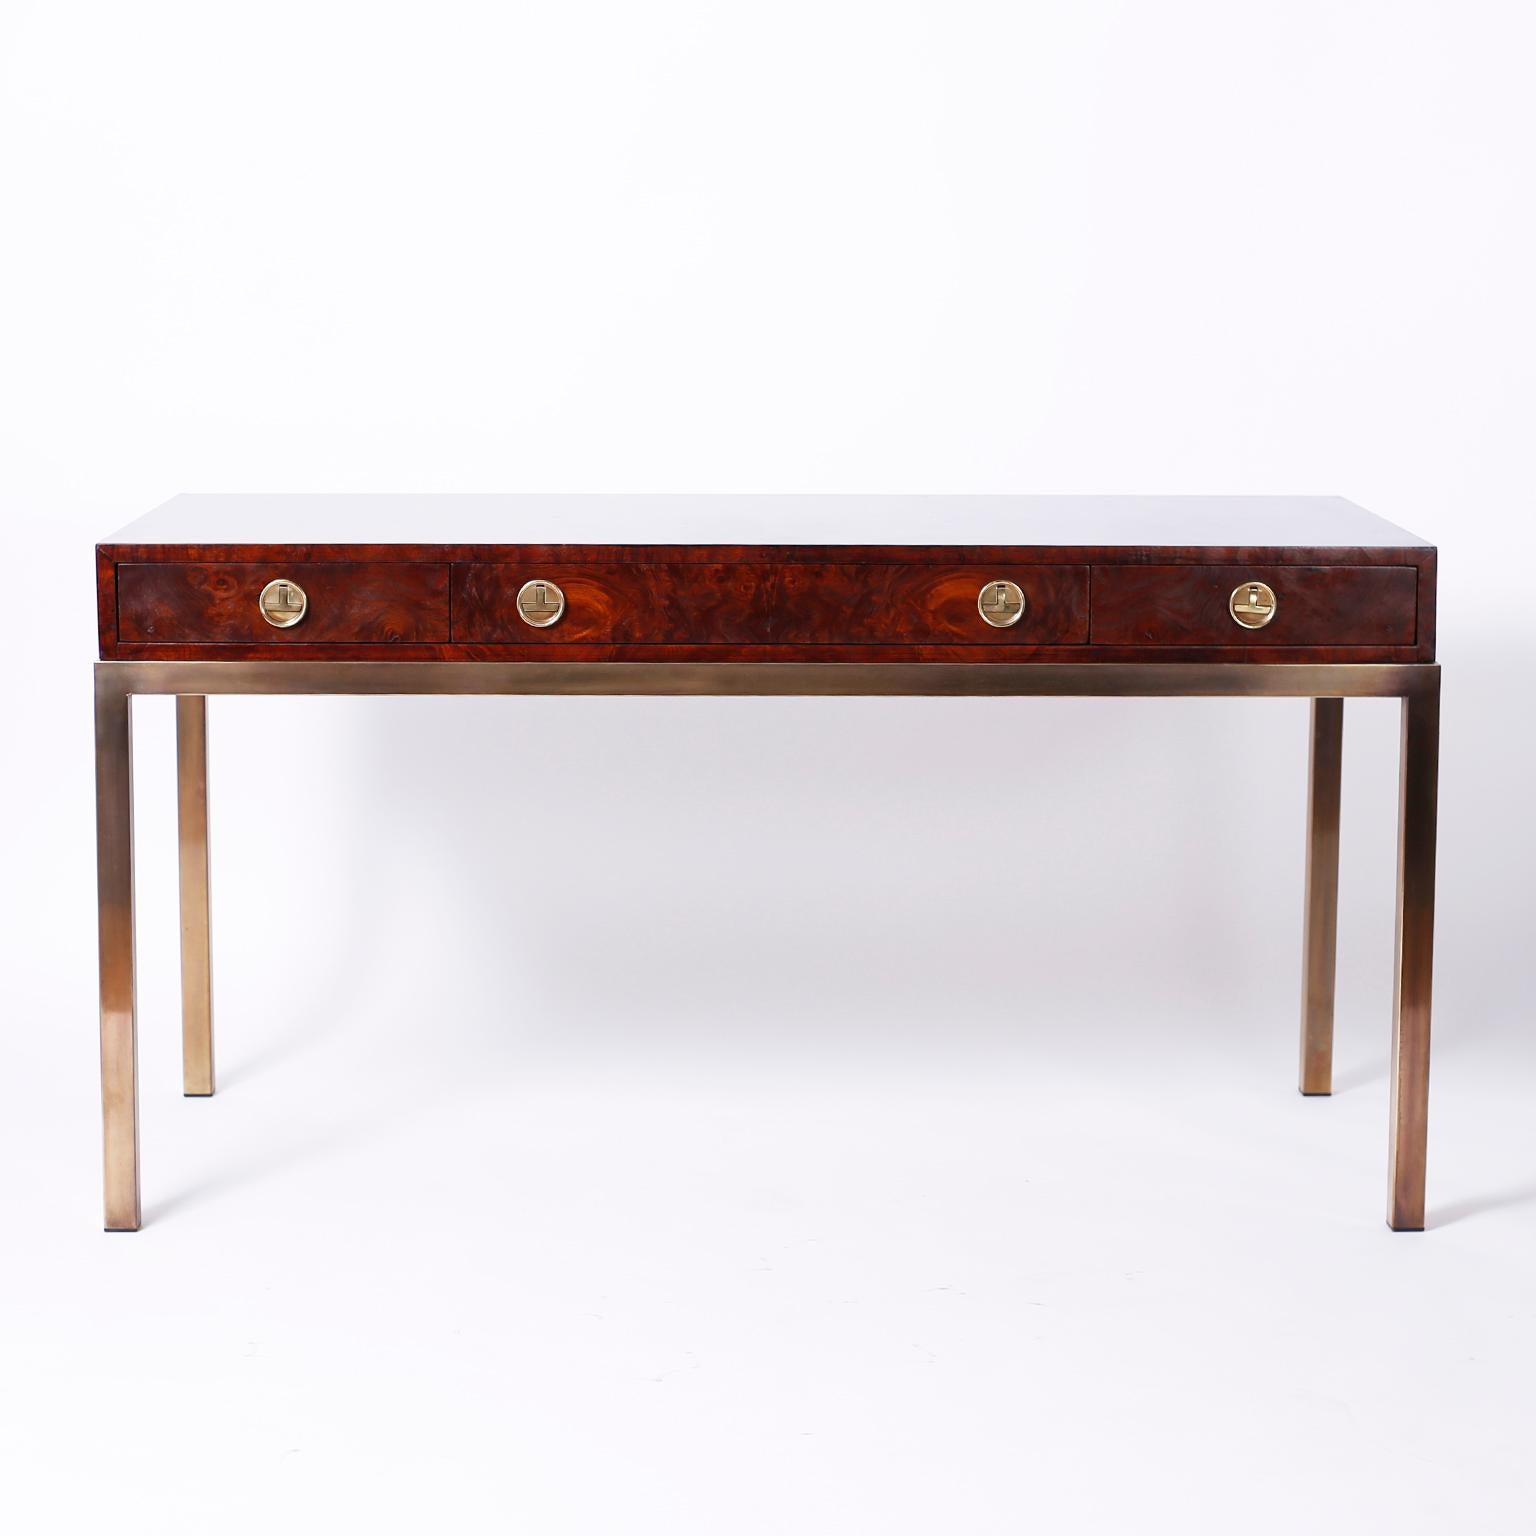 In vogue three-drawer writing desk with a lush custom finish over well grained burled walnut on all four sides, stylized brass Campaign hardware and elegant lacquered brass legs. Signed Mastercraft in a drawer.